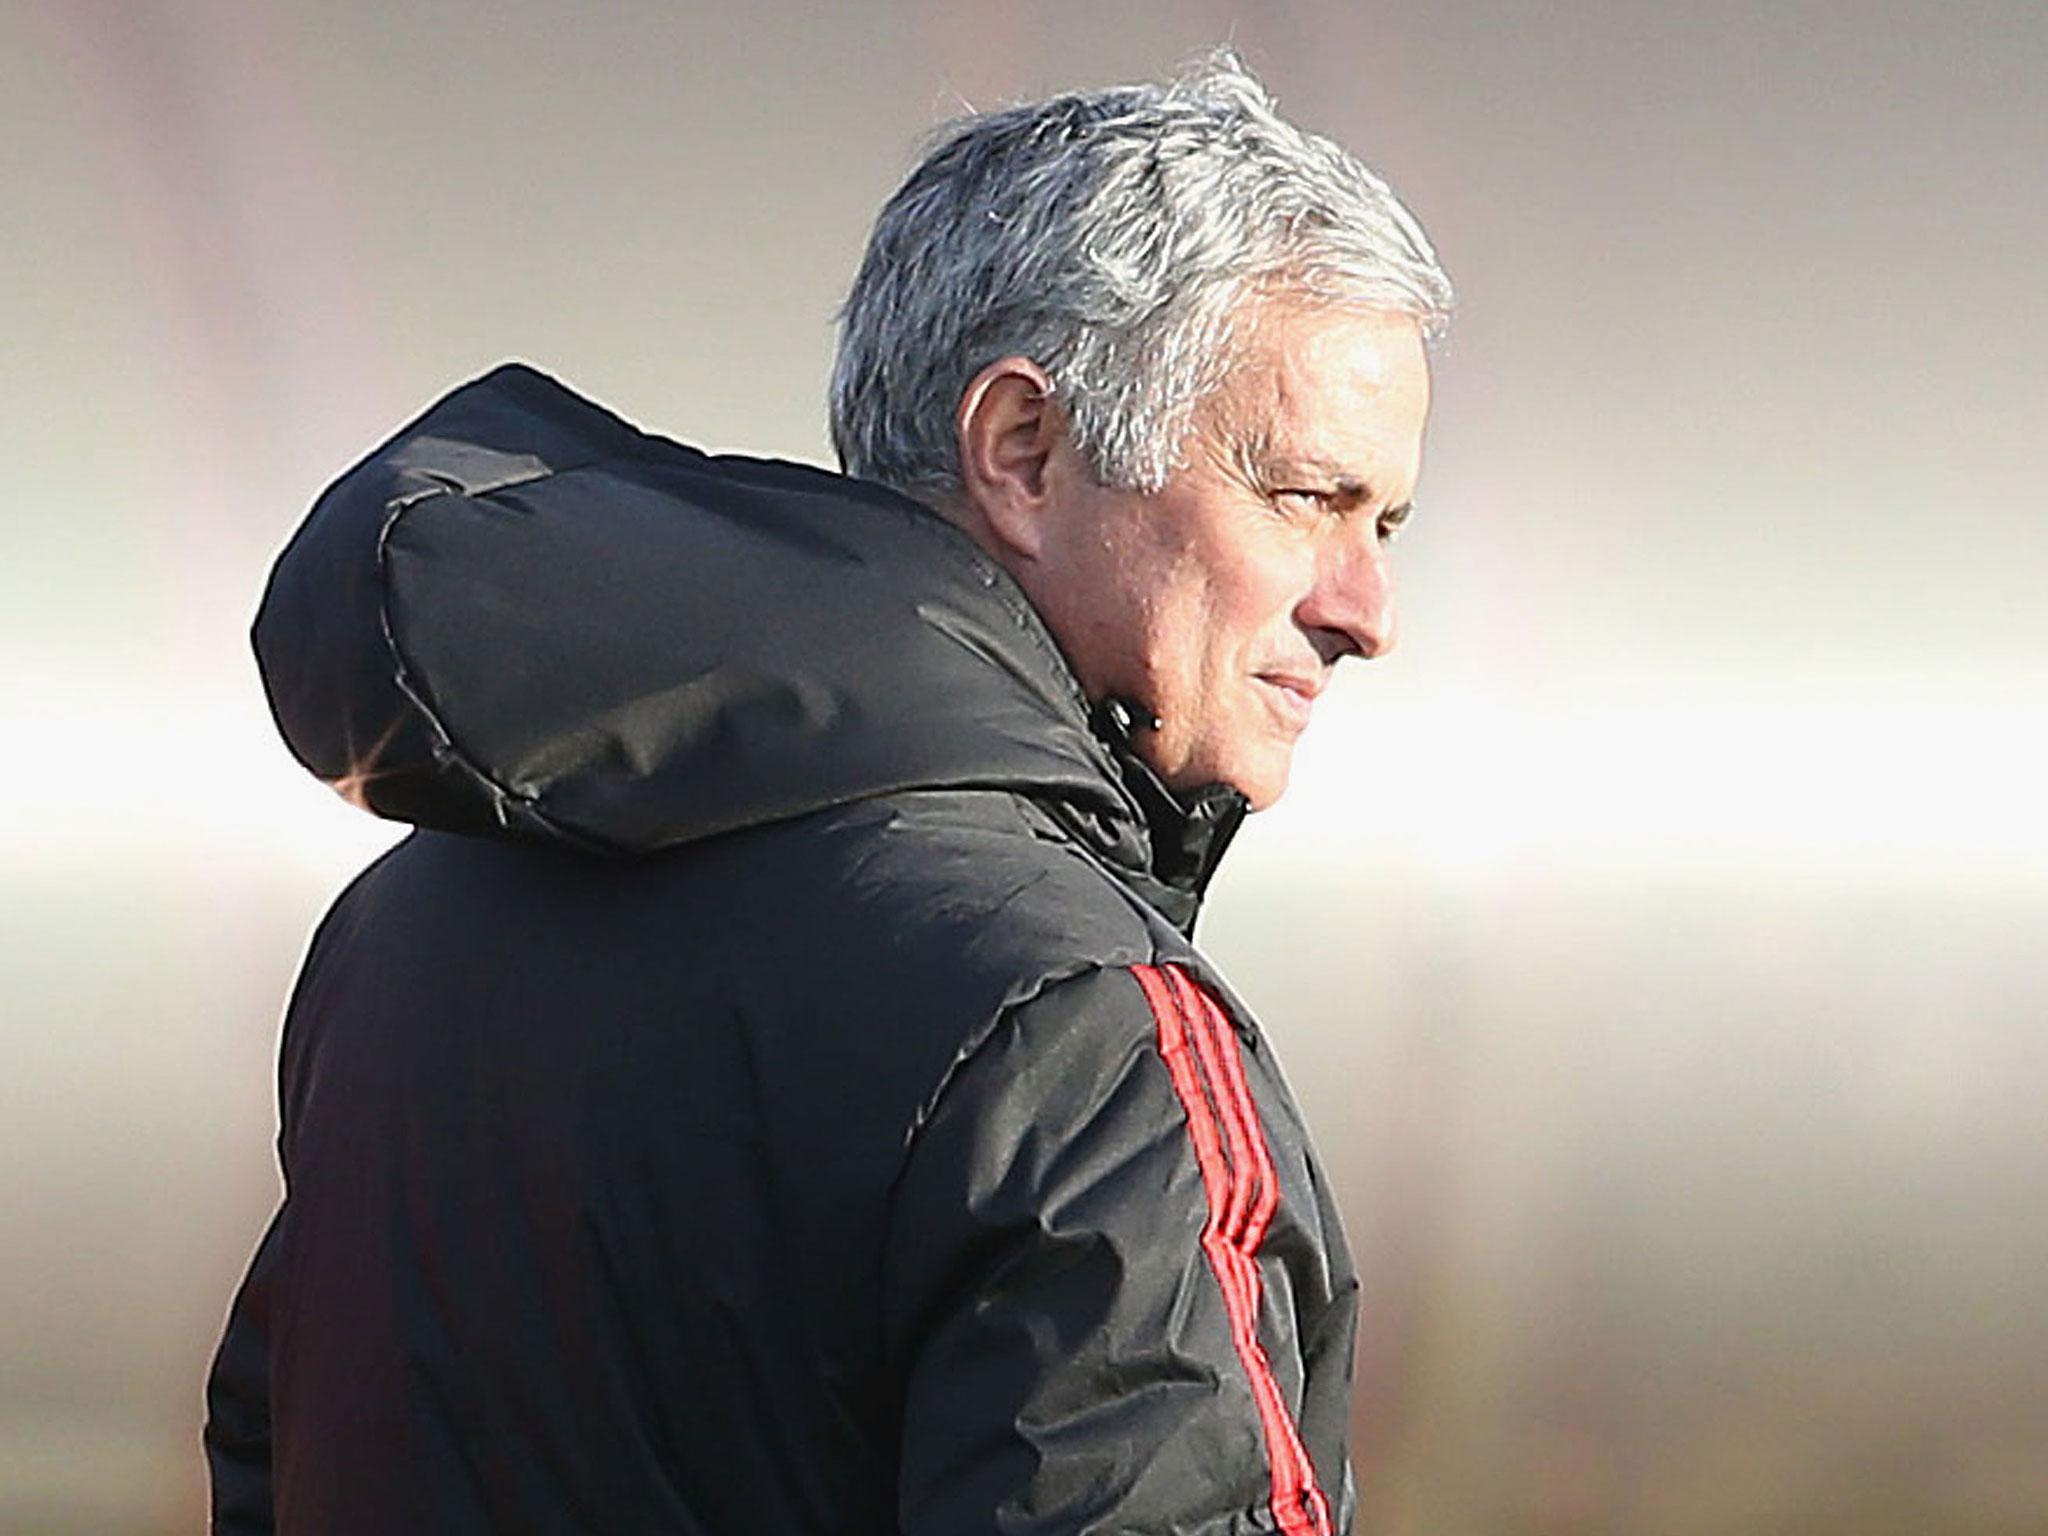 Jose Mourinho has continued his public spat with Manchester United fans